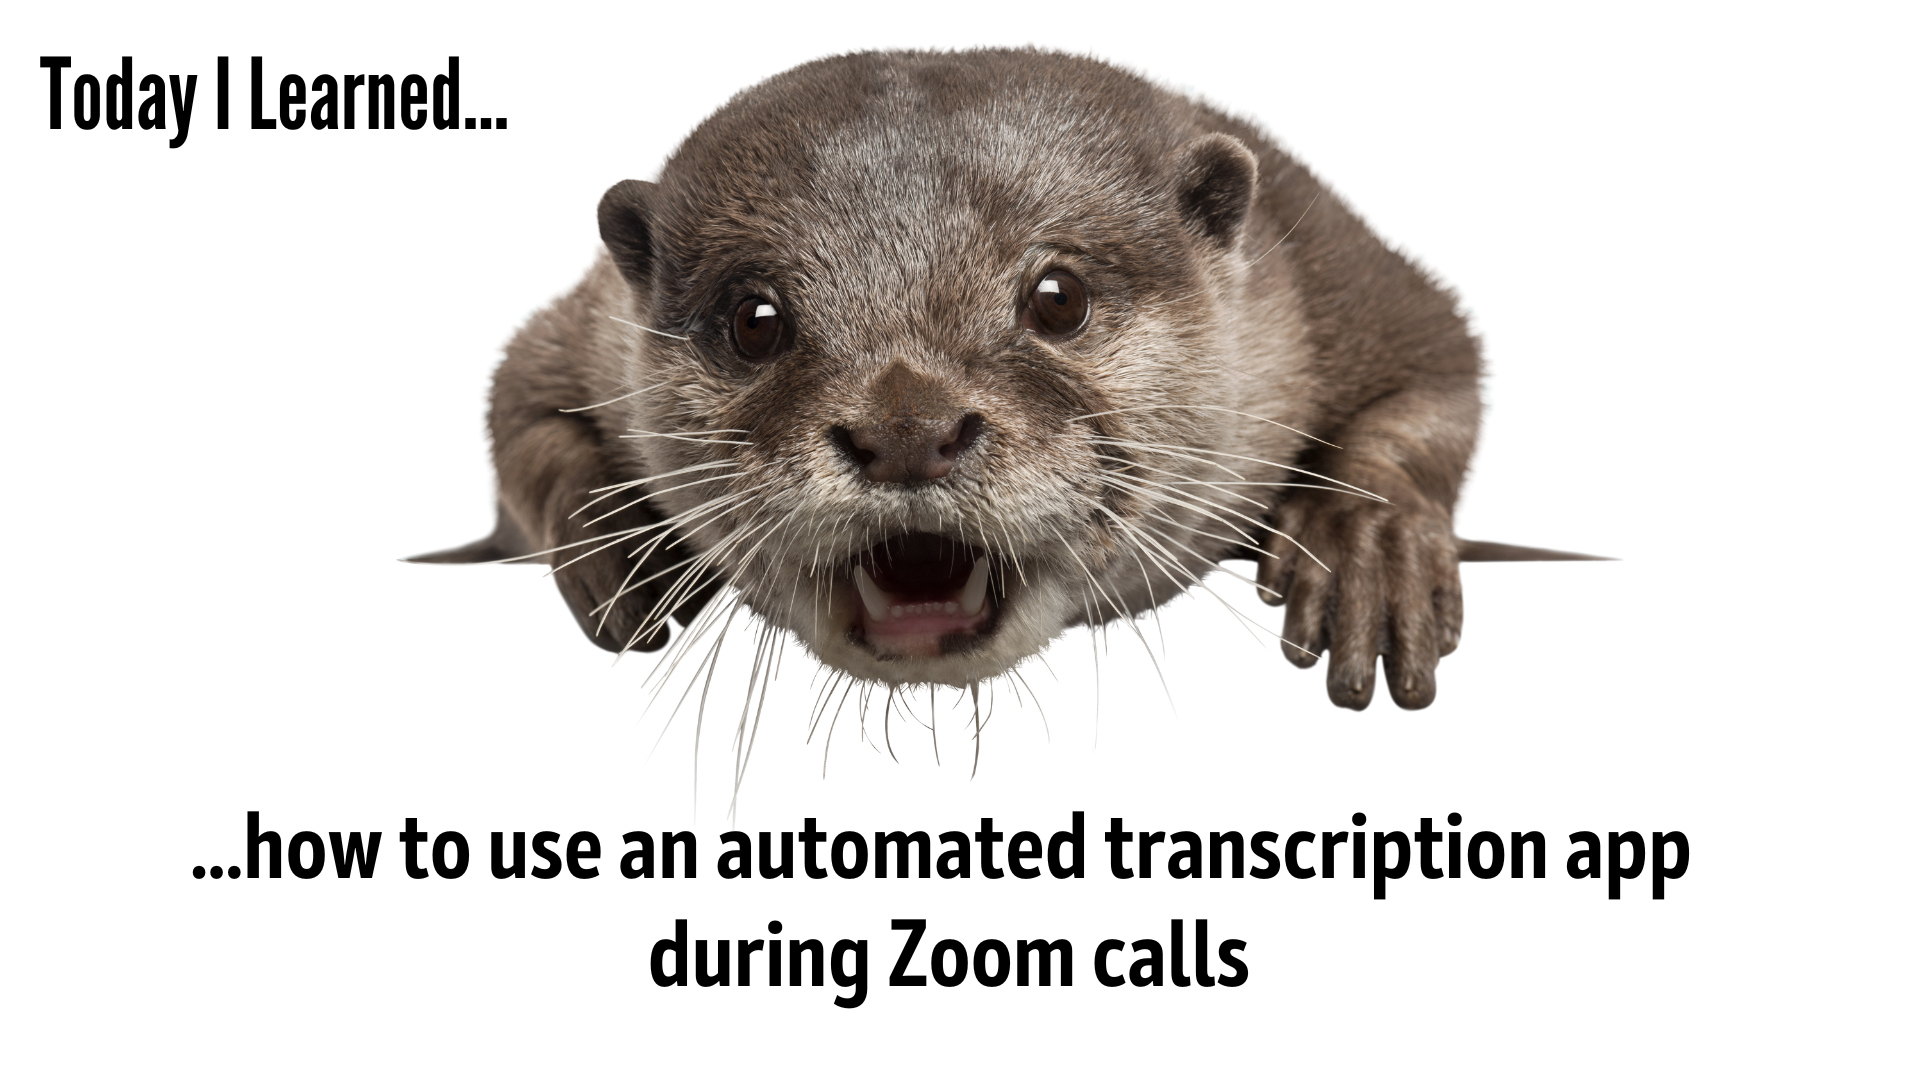 How to Use an Automated Transcription App During Zoom Calls